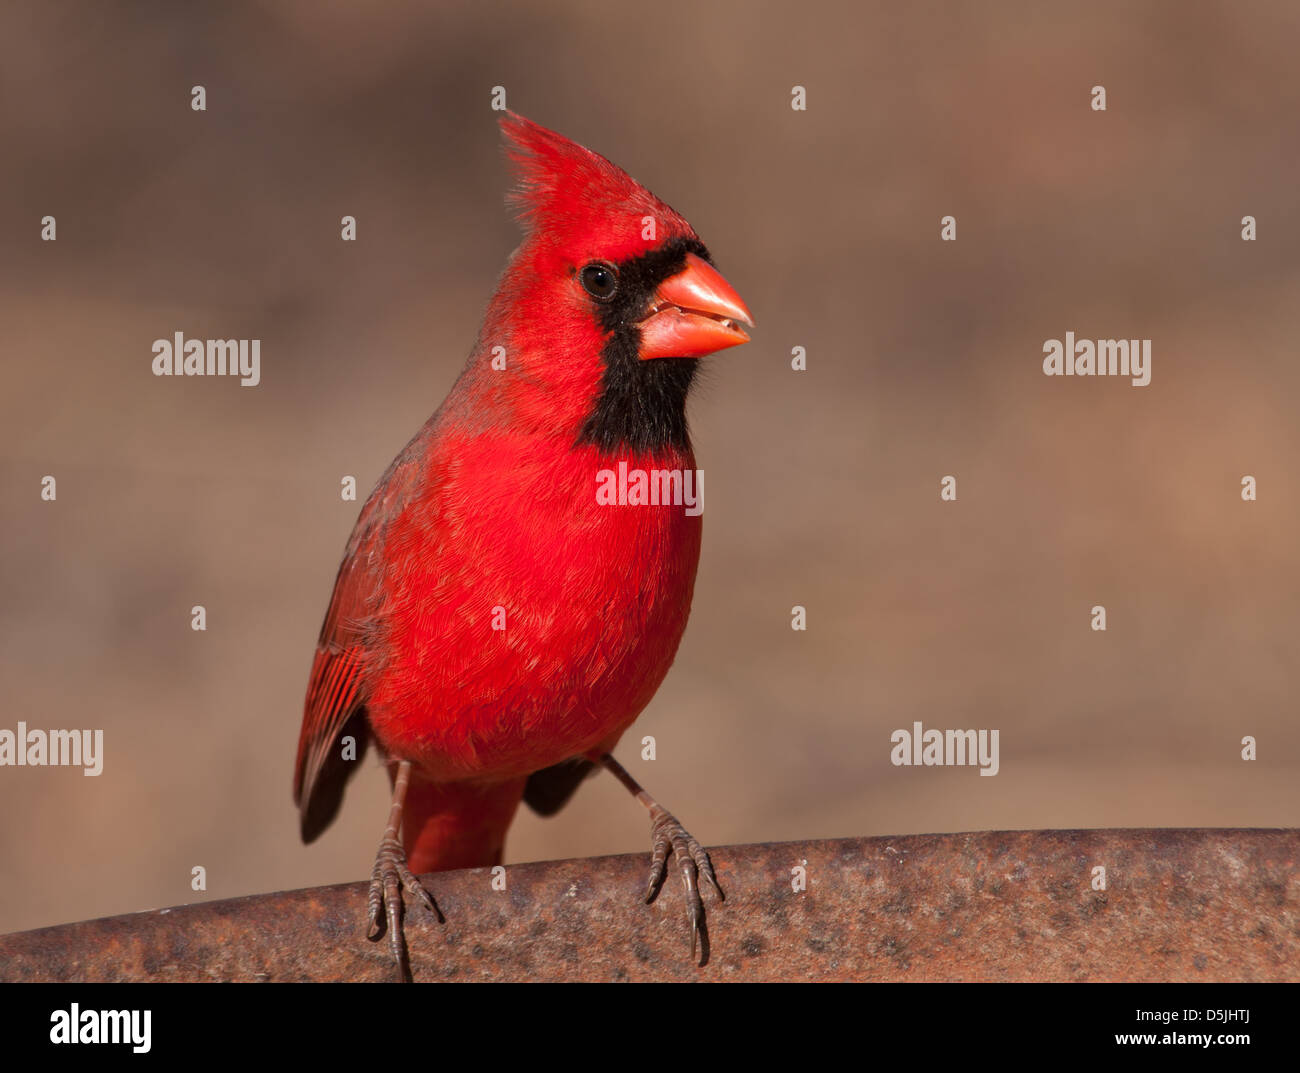 Bright red male Northern Cardinal sitting on the edge of a metal feeder Stock Photo